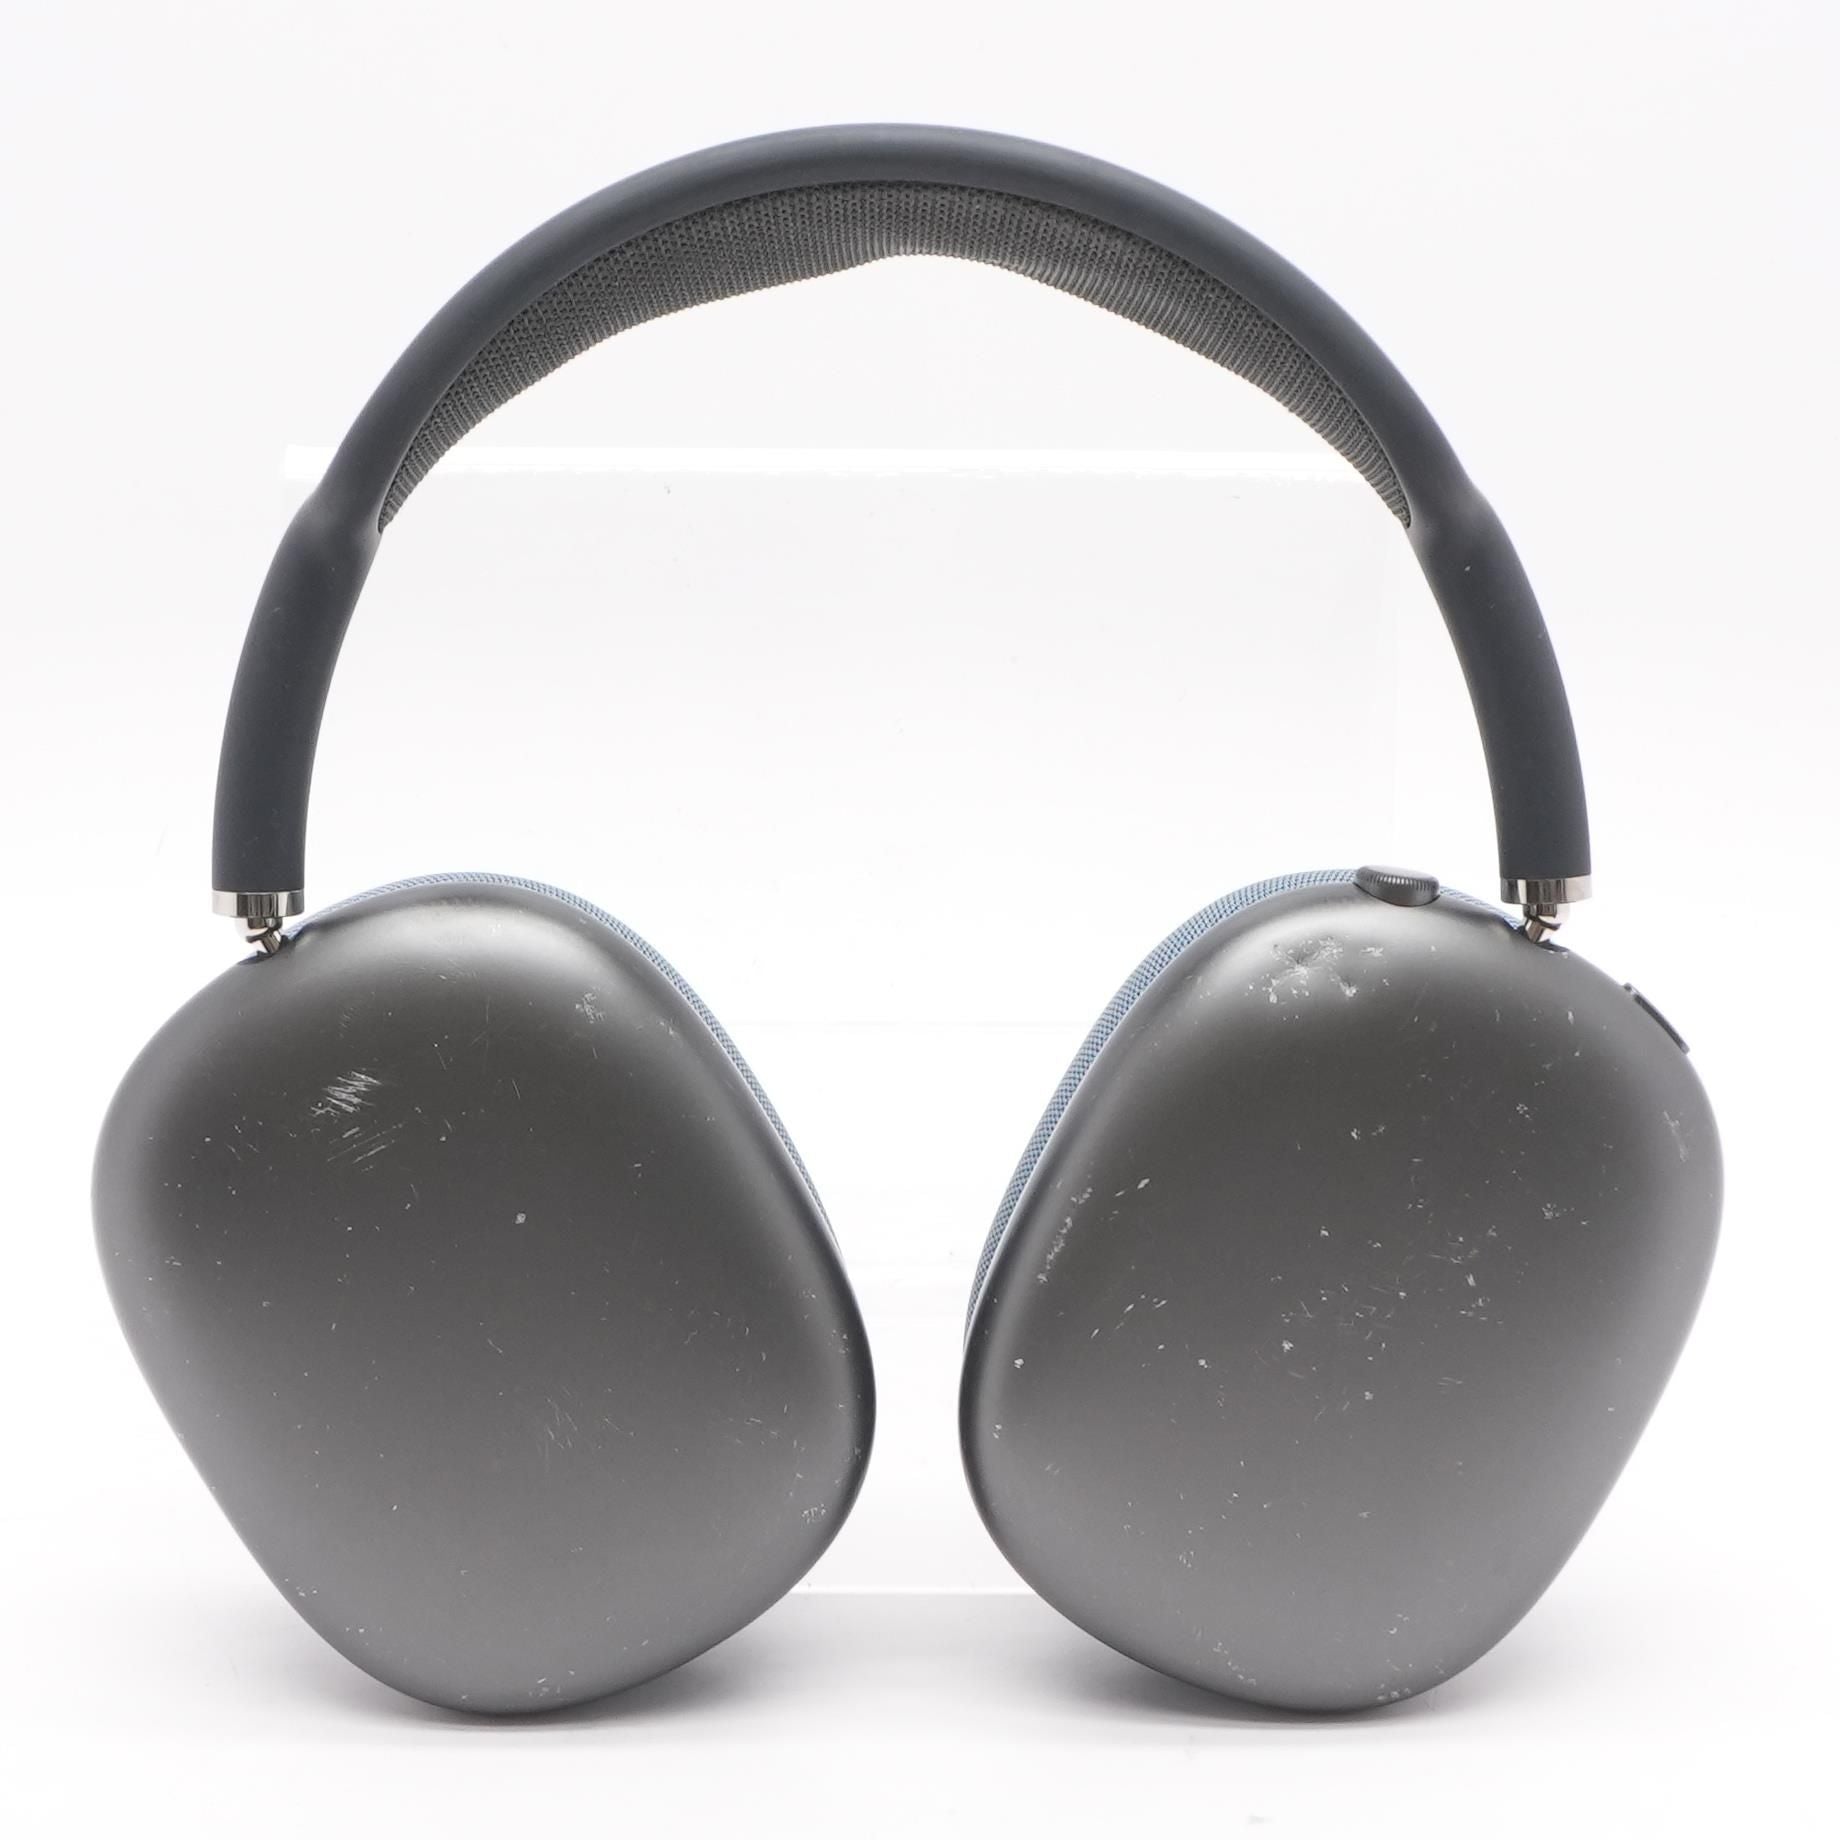 AirPod Max in Space Gray with Blue Earpads